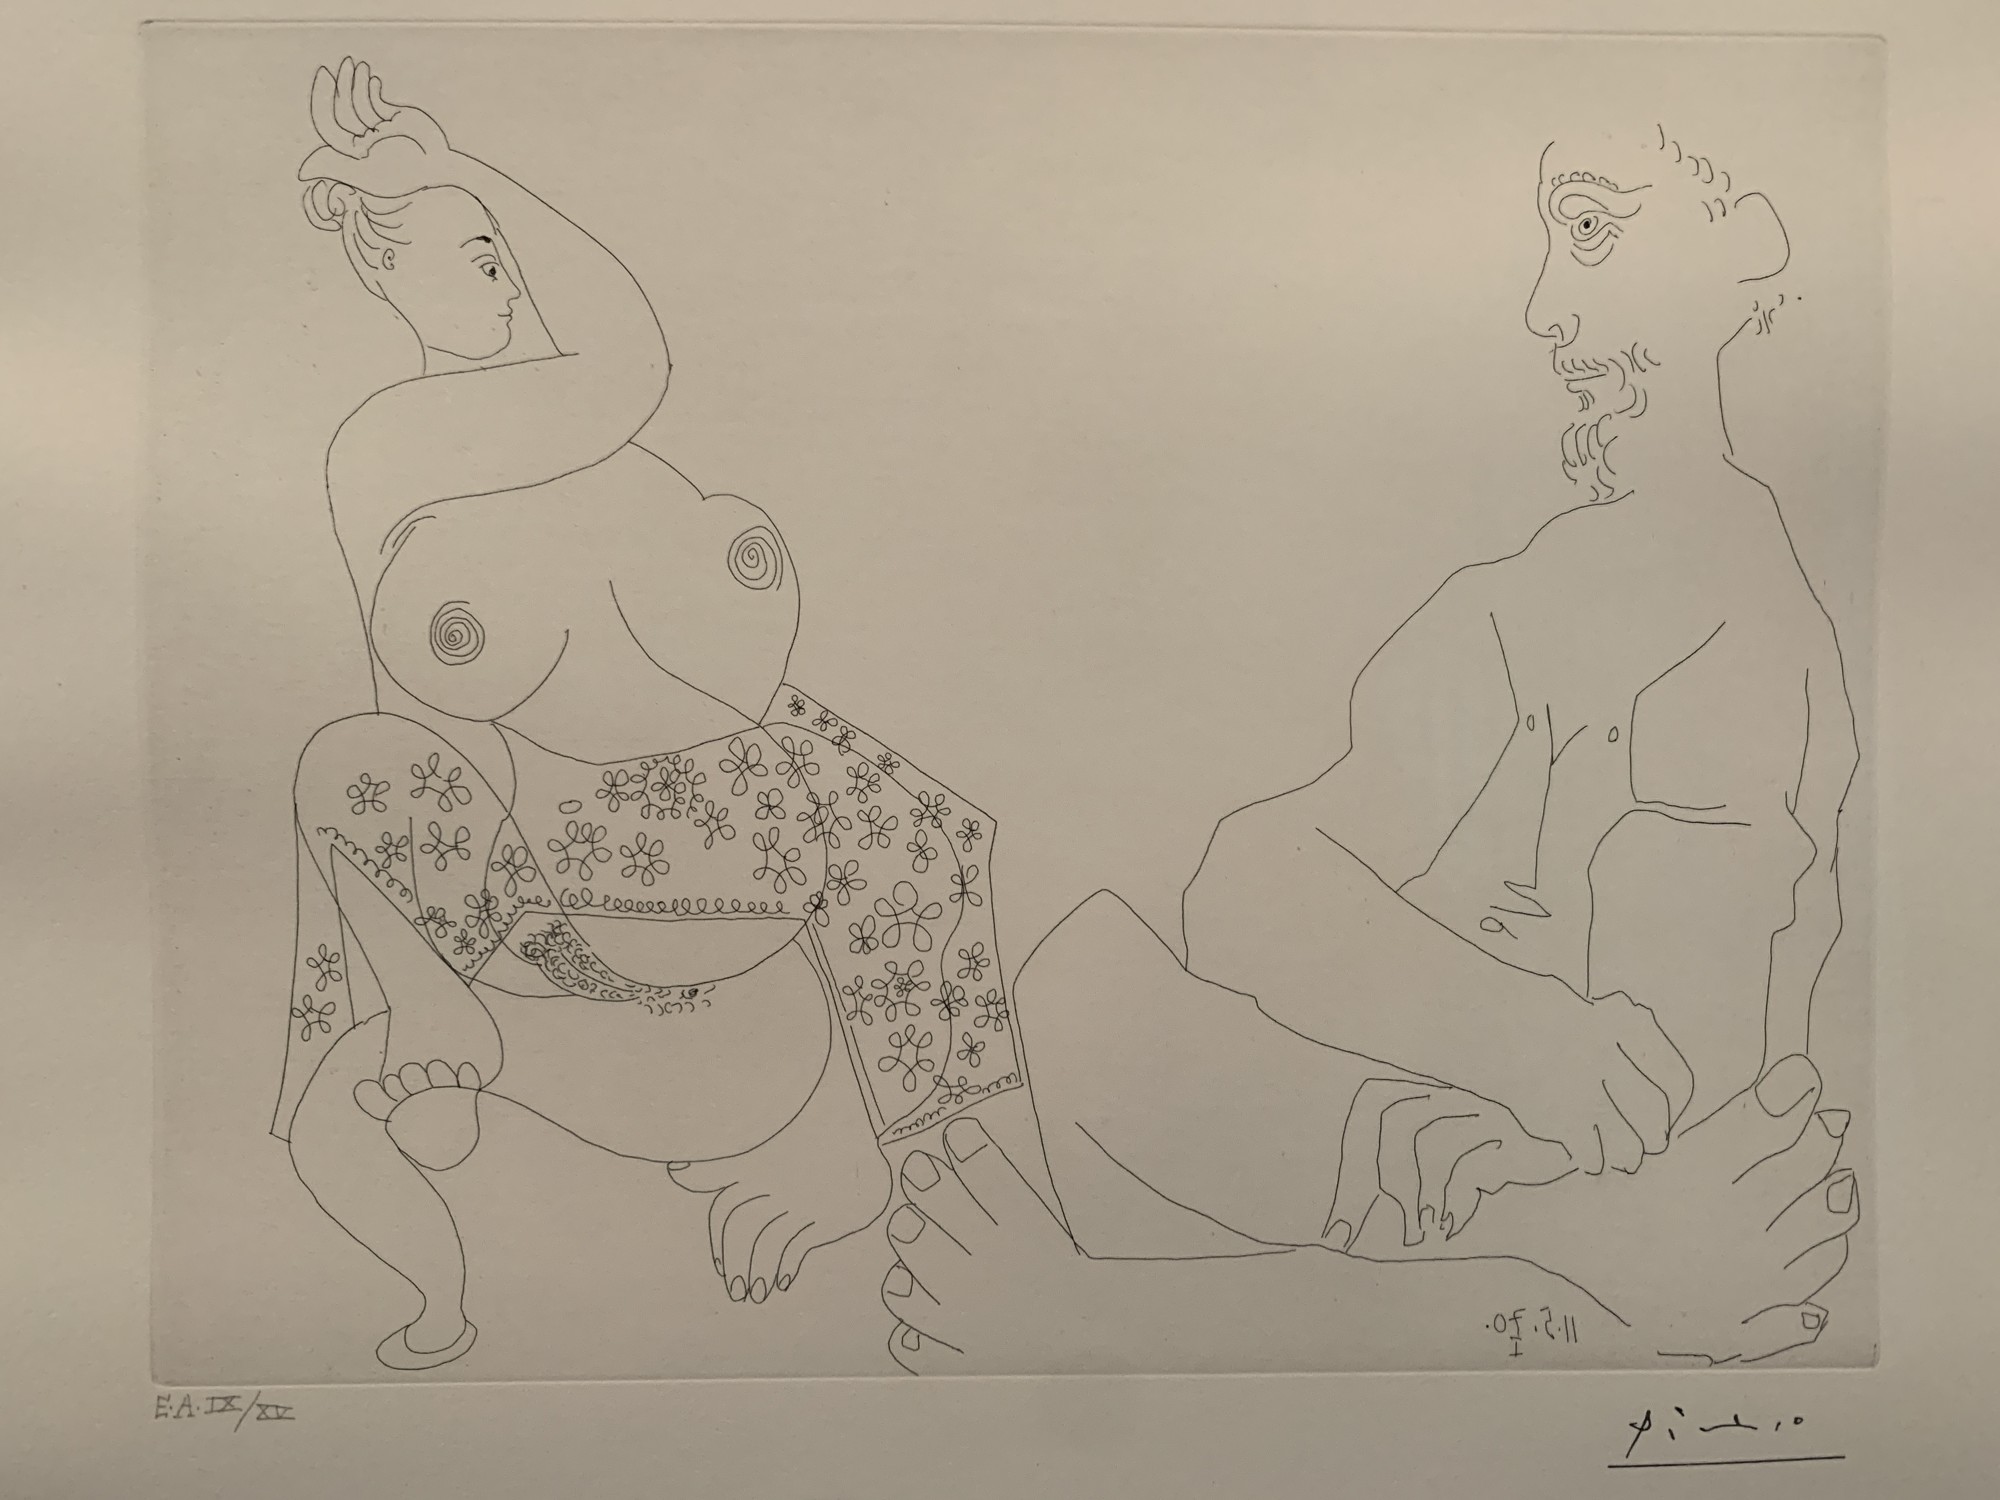 Courtesy. Pablo Picasso drew this in 1971, and it’s one of a series of 156 etchings.